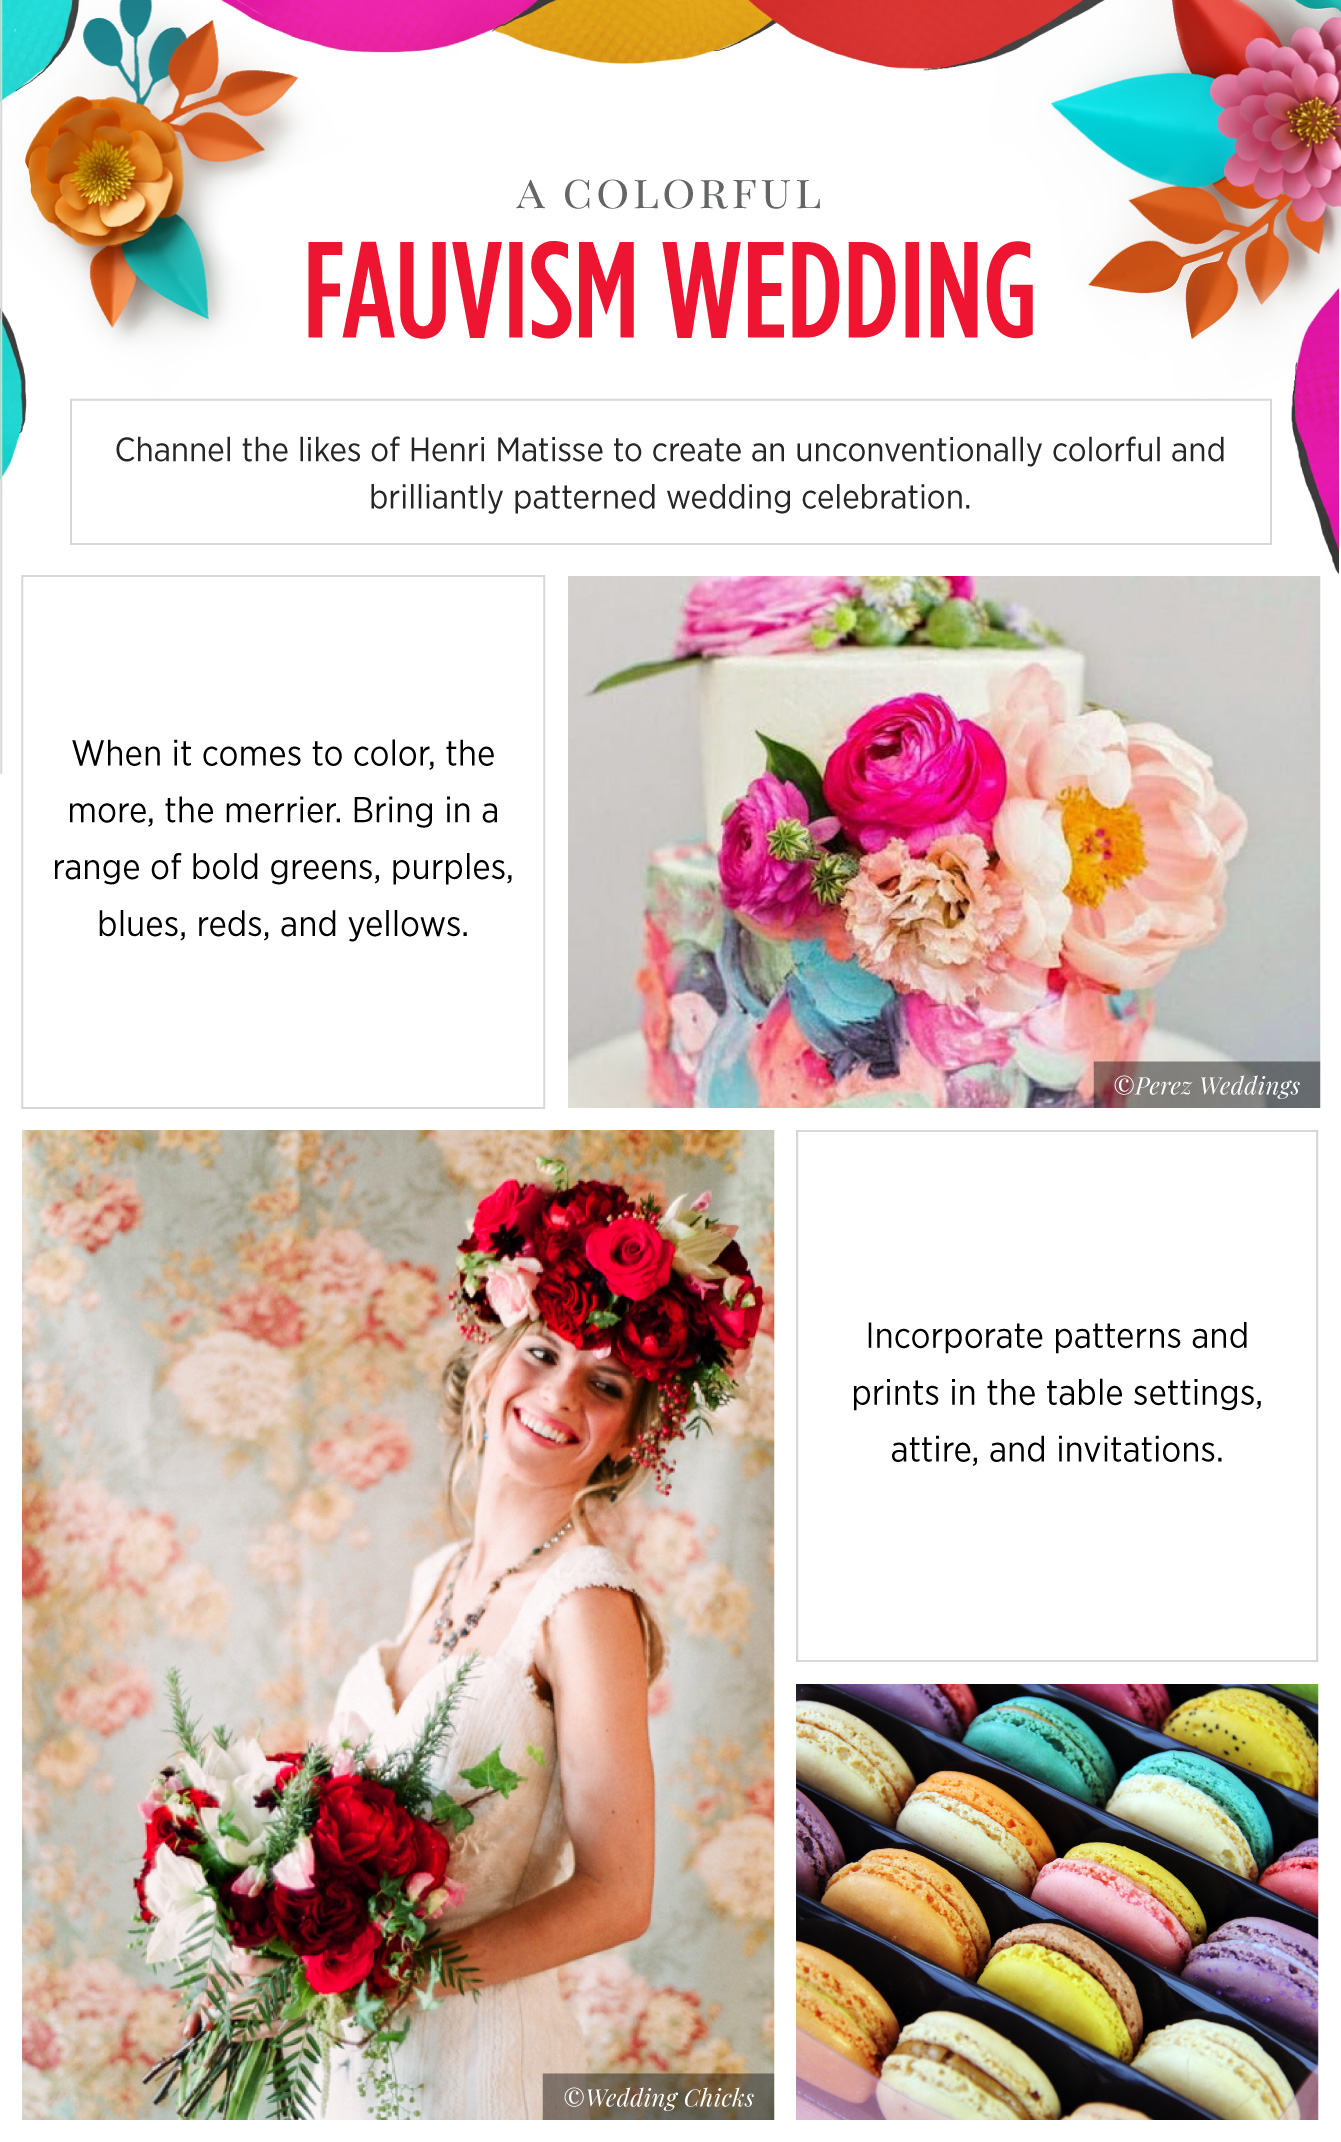 Wedding inspiration fauvism - See more inspirating wedding themes on B. Lovely Events